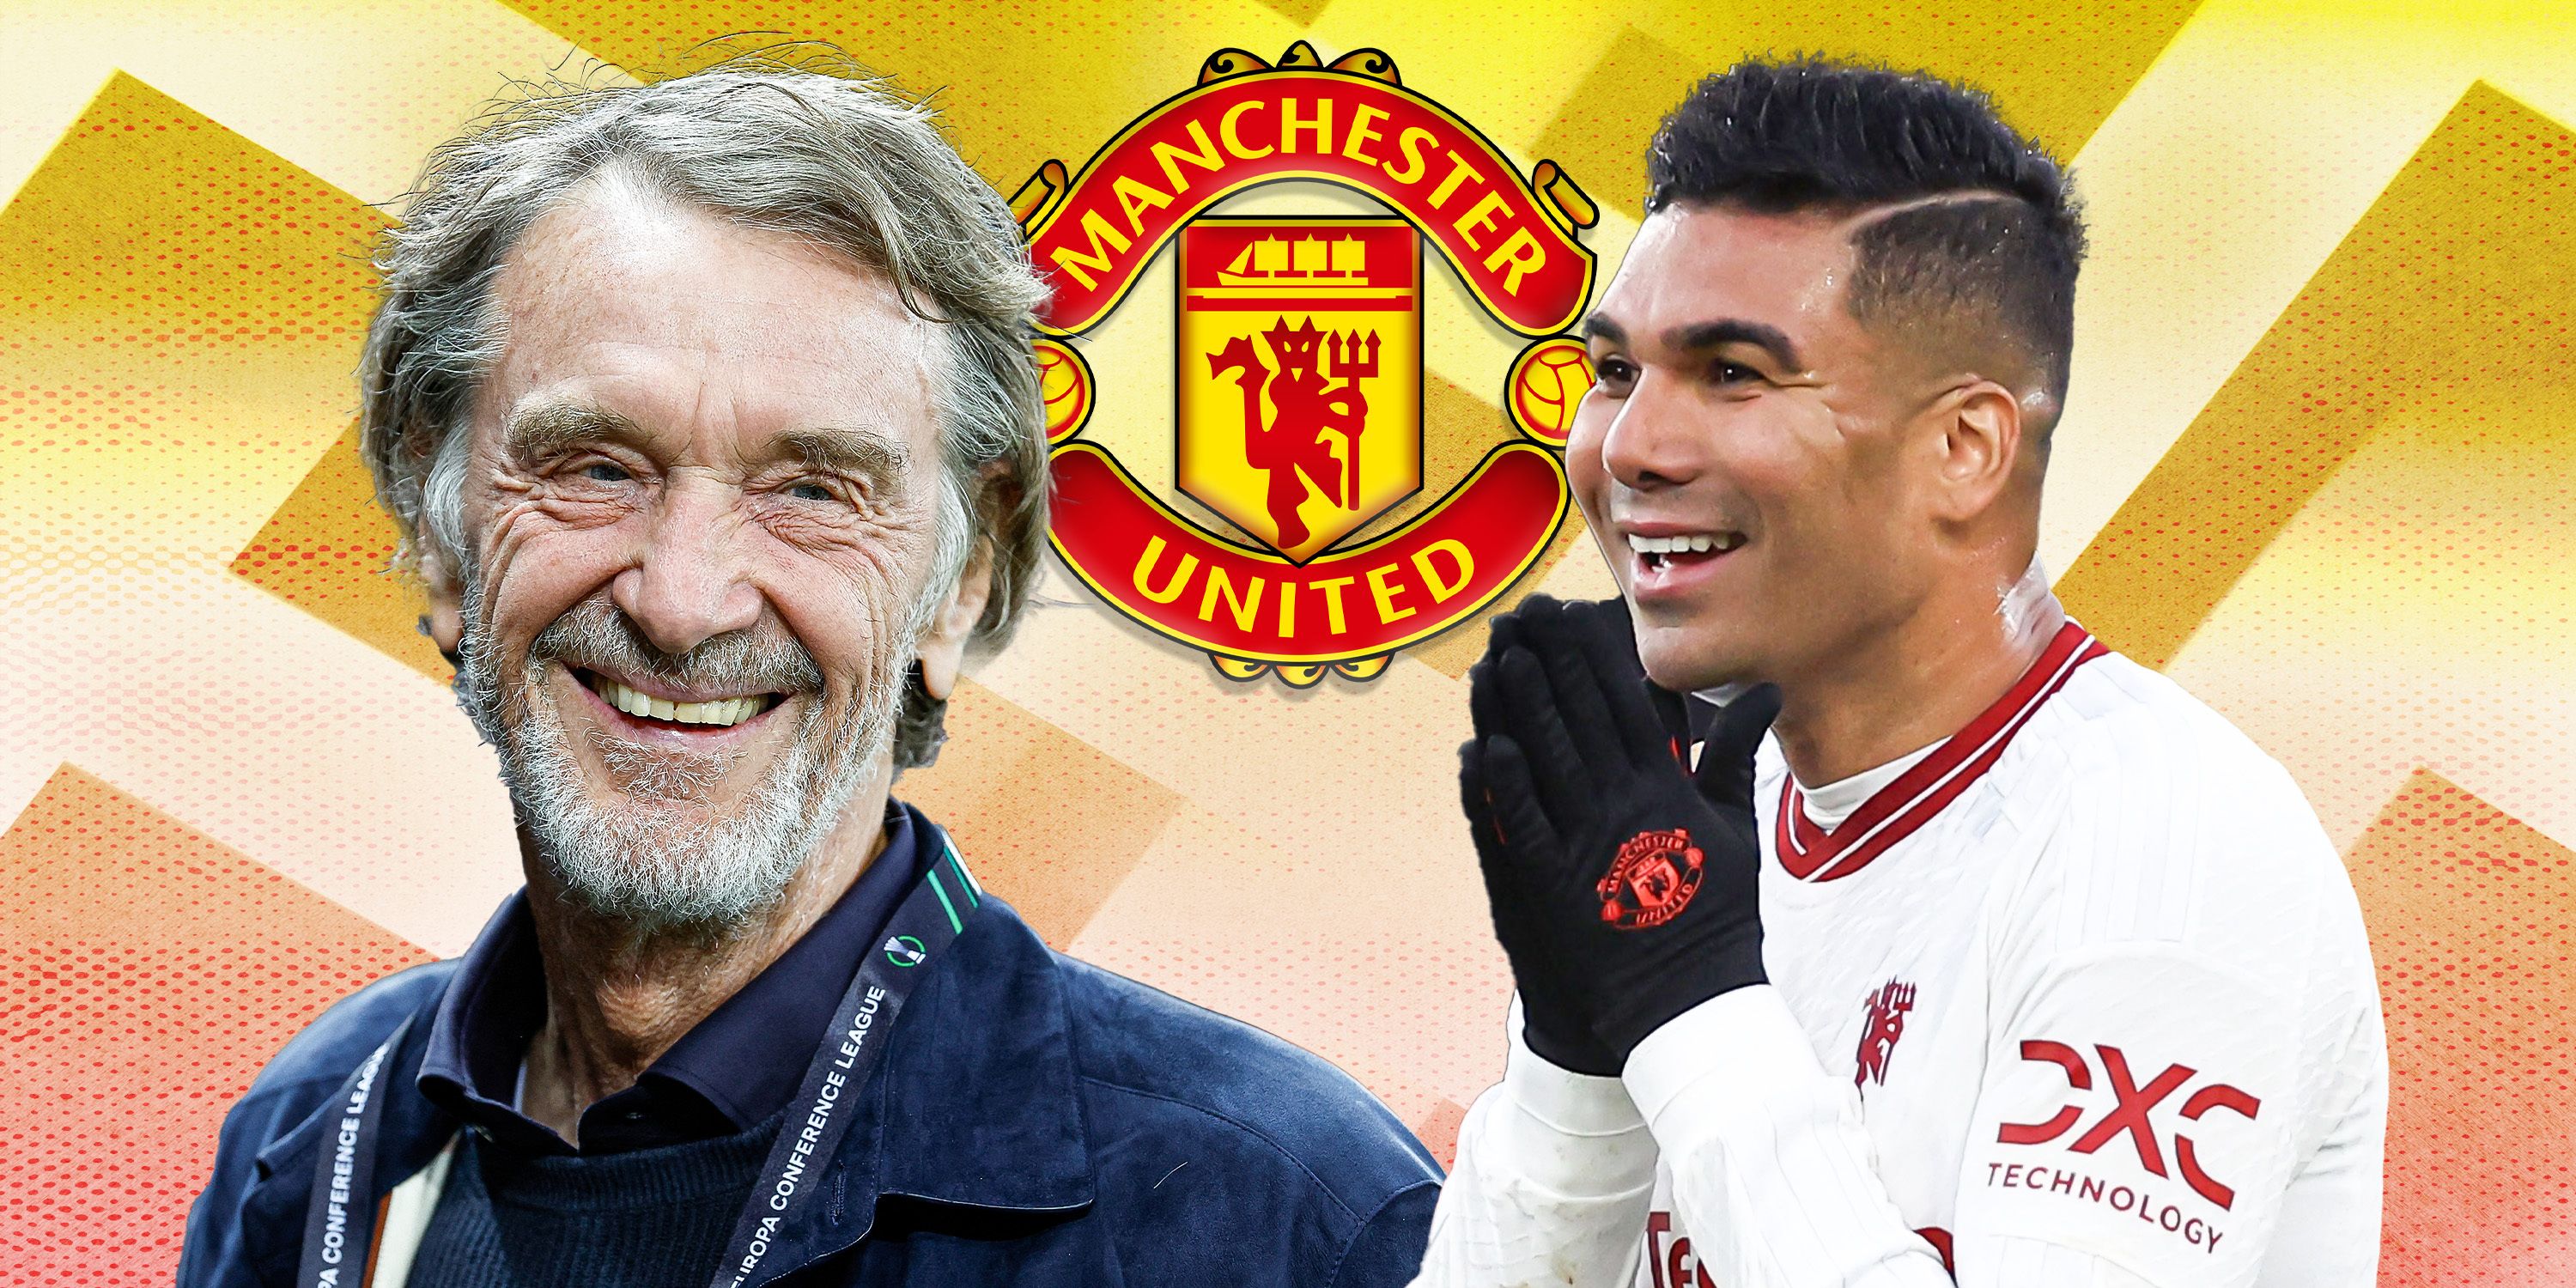 Sir Jim Ratcliffe and Man Utd badge and theme with Casemiro